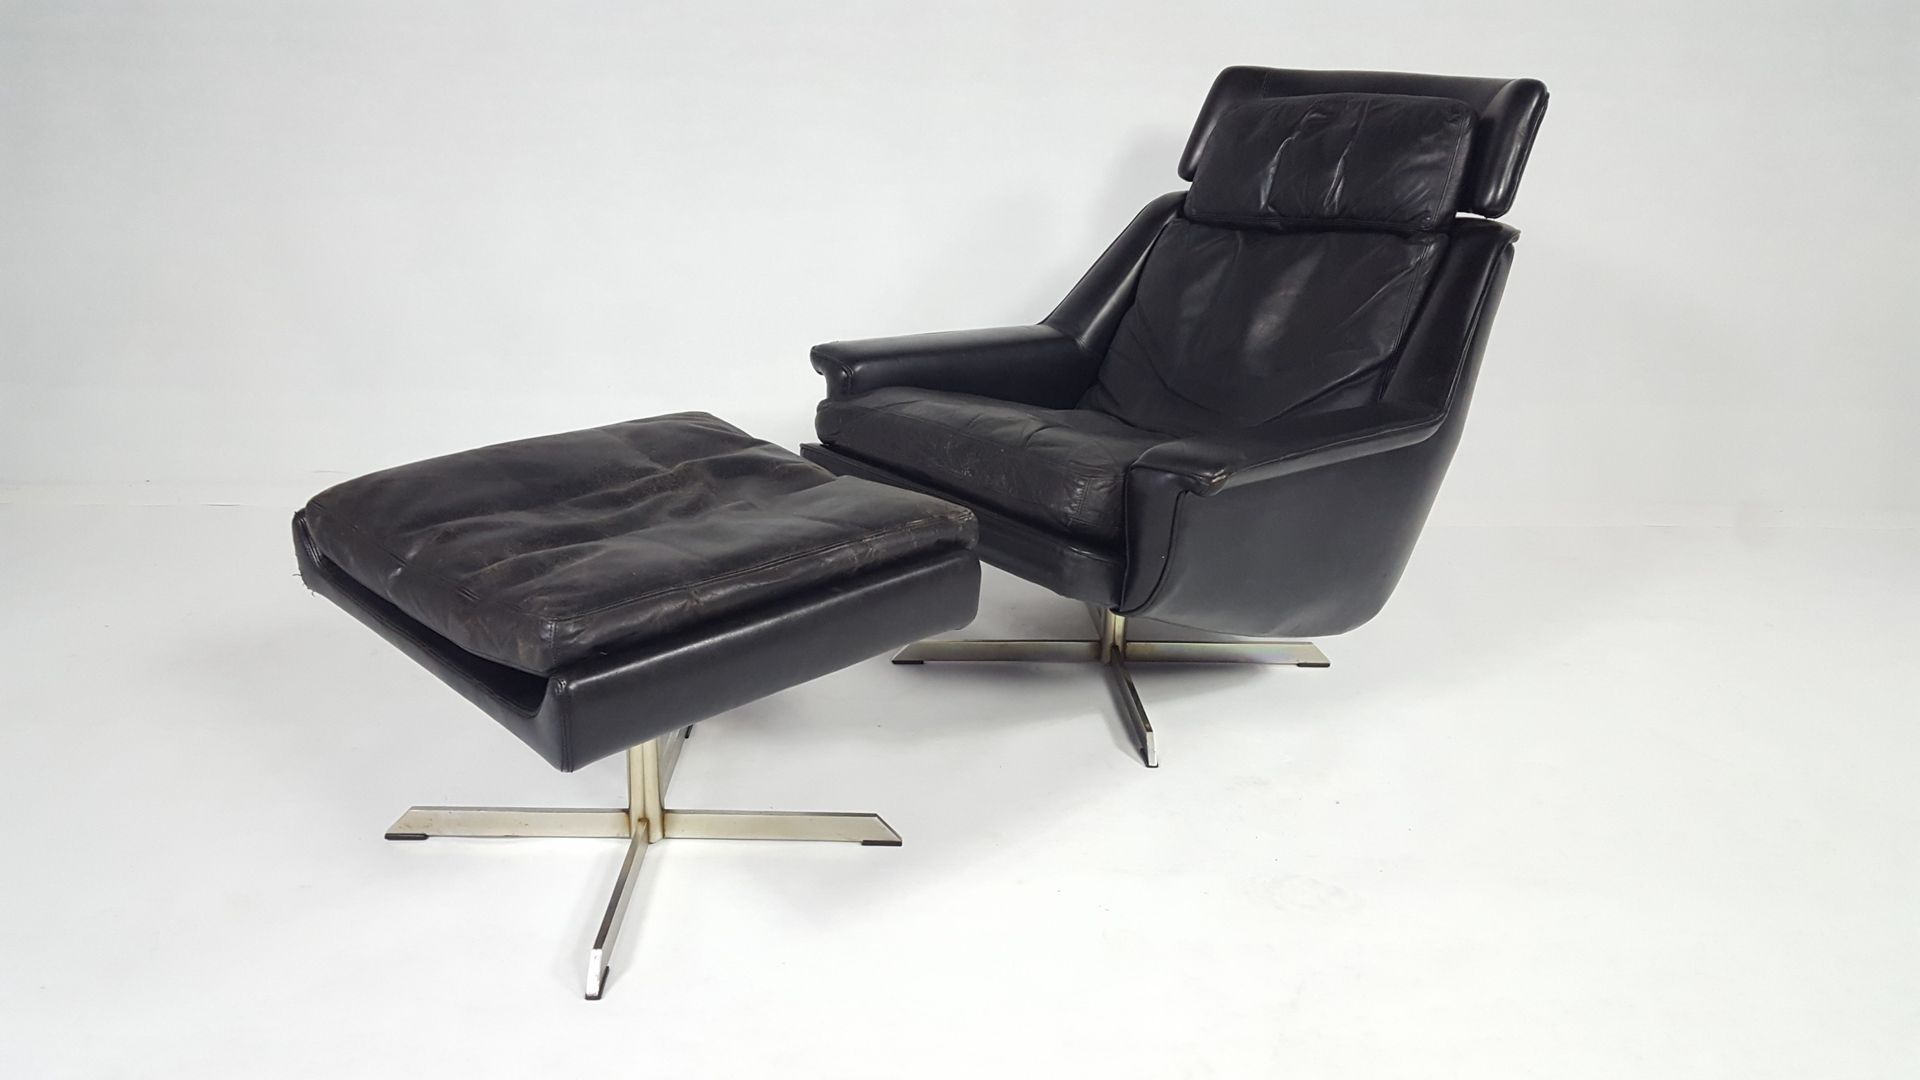 vintage-danish-leather-lounge-chair-and-ottoman-by-werner-langenfeld-for-esa-1970s-2.jpg